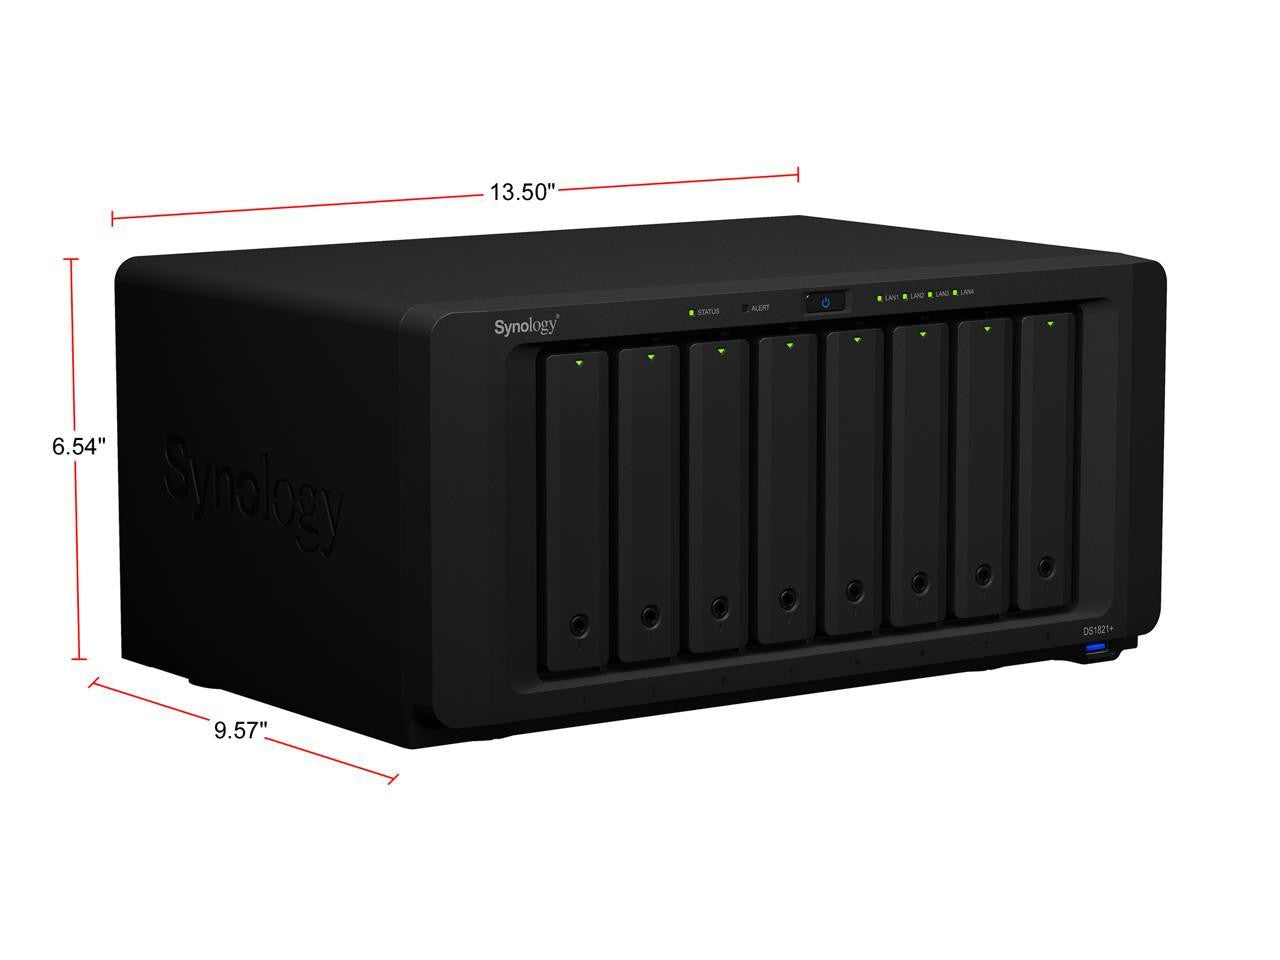 Synology DS1821+ 8-BAY DiskStation with 4GB Synology RAM and 24TB (8x3TB) Western Digital RED PLUS Drives Fully Assembled and Tested